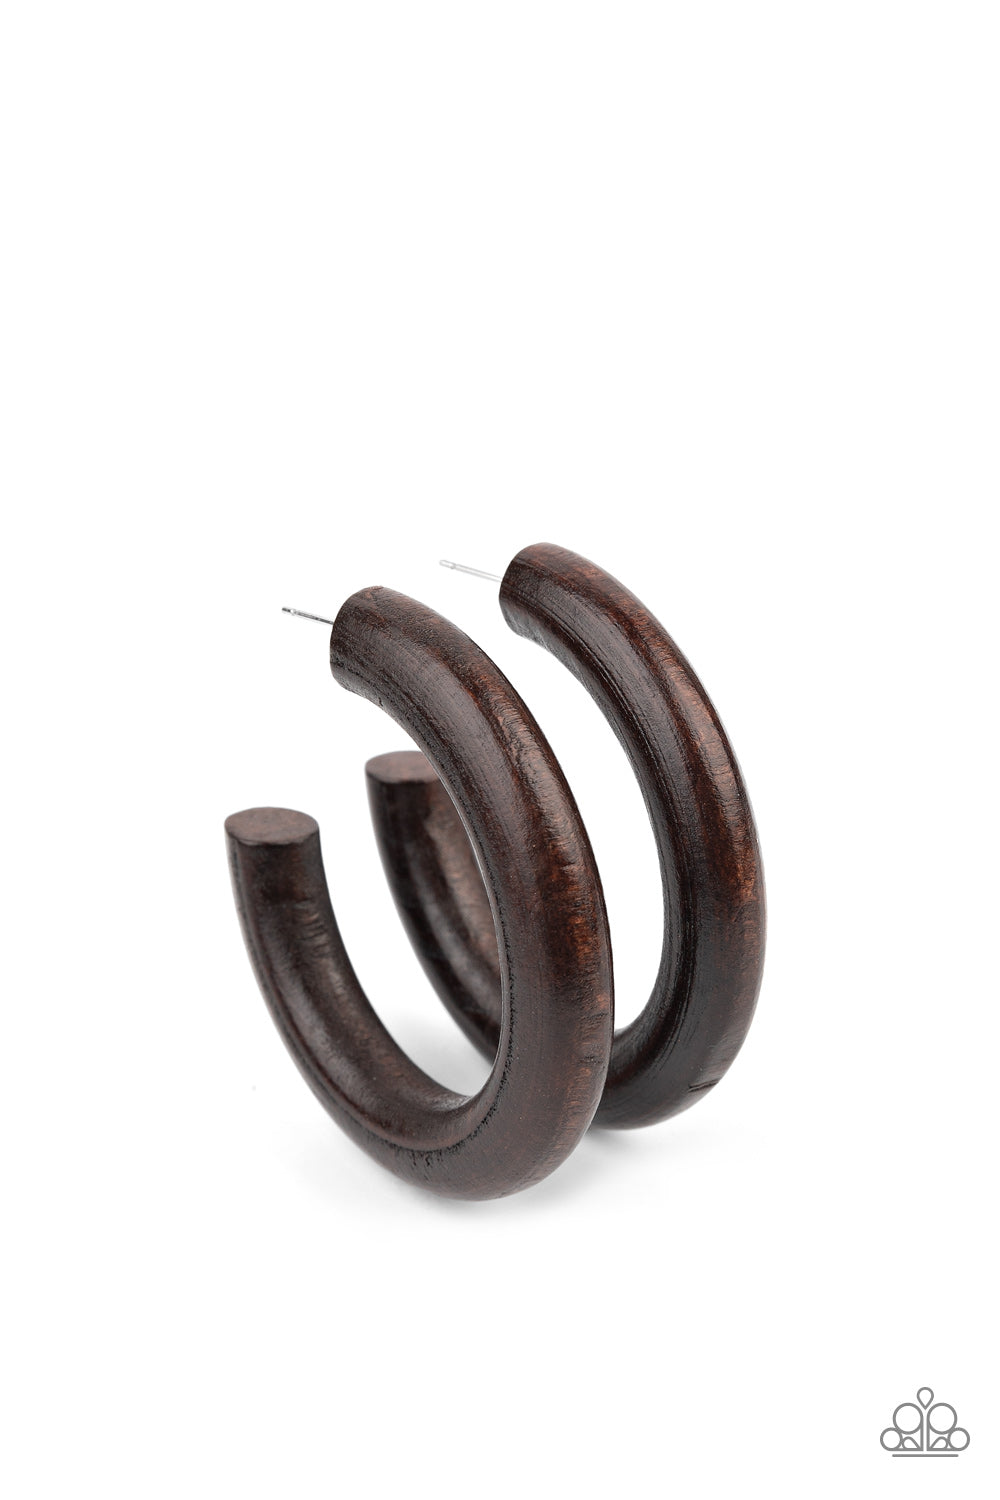 Paparazzi Accessories - Woodsy Wonder - #E370 Brown Earrings